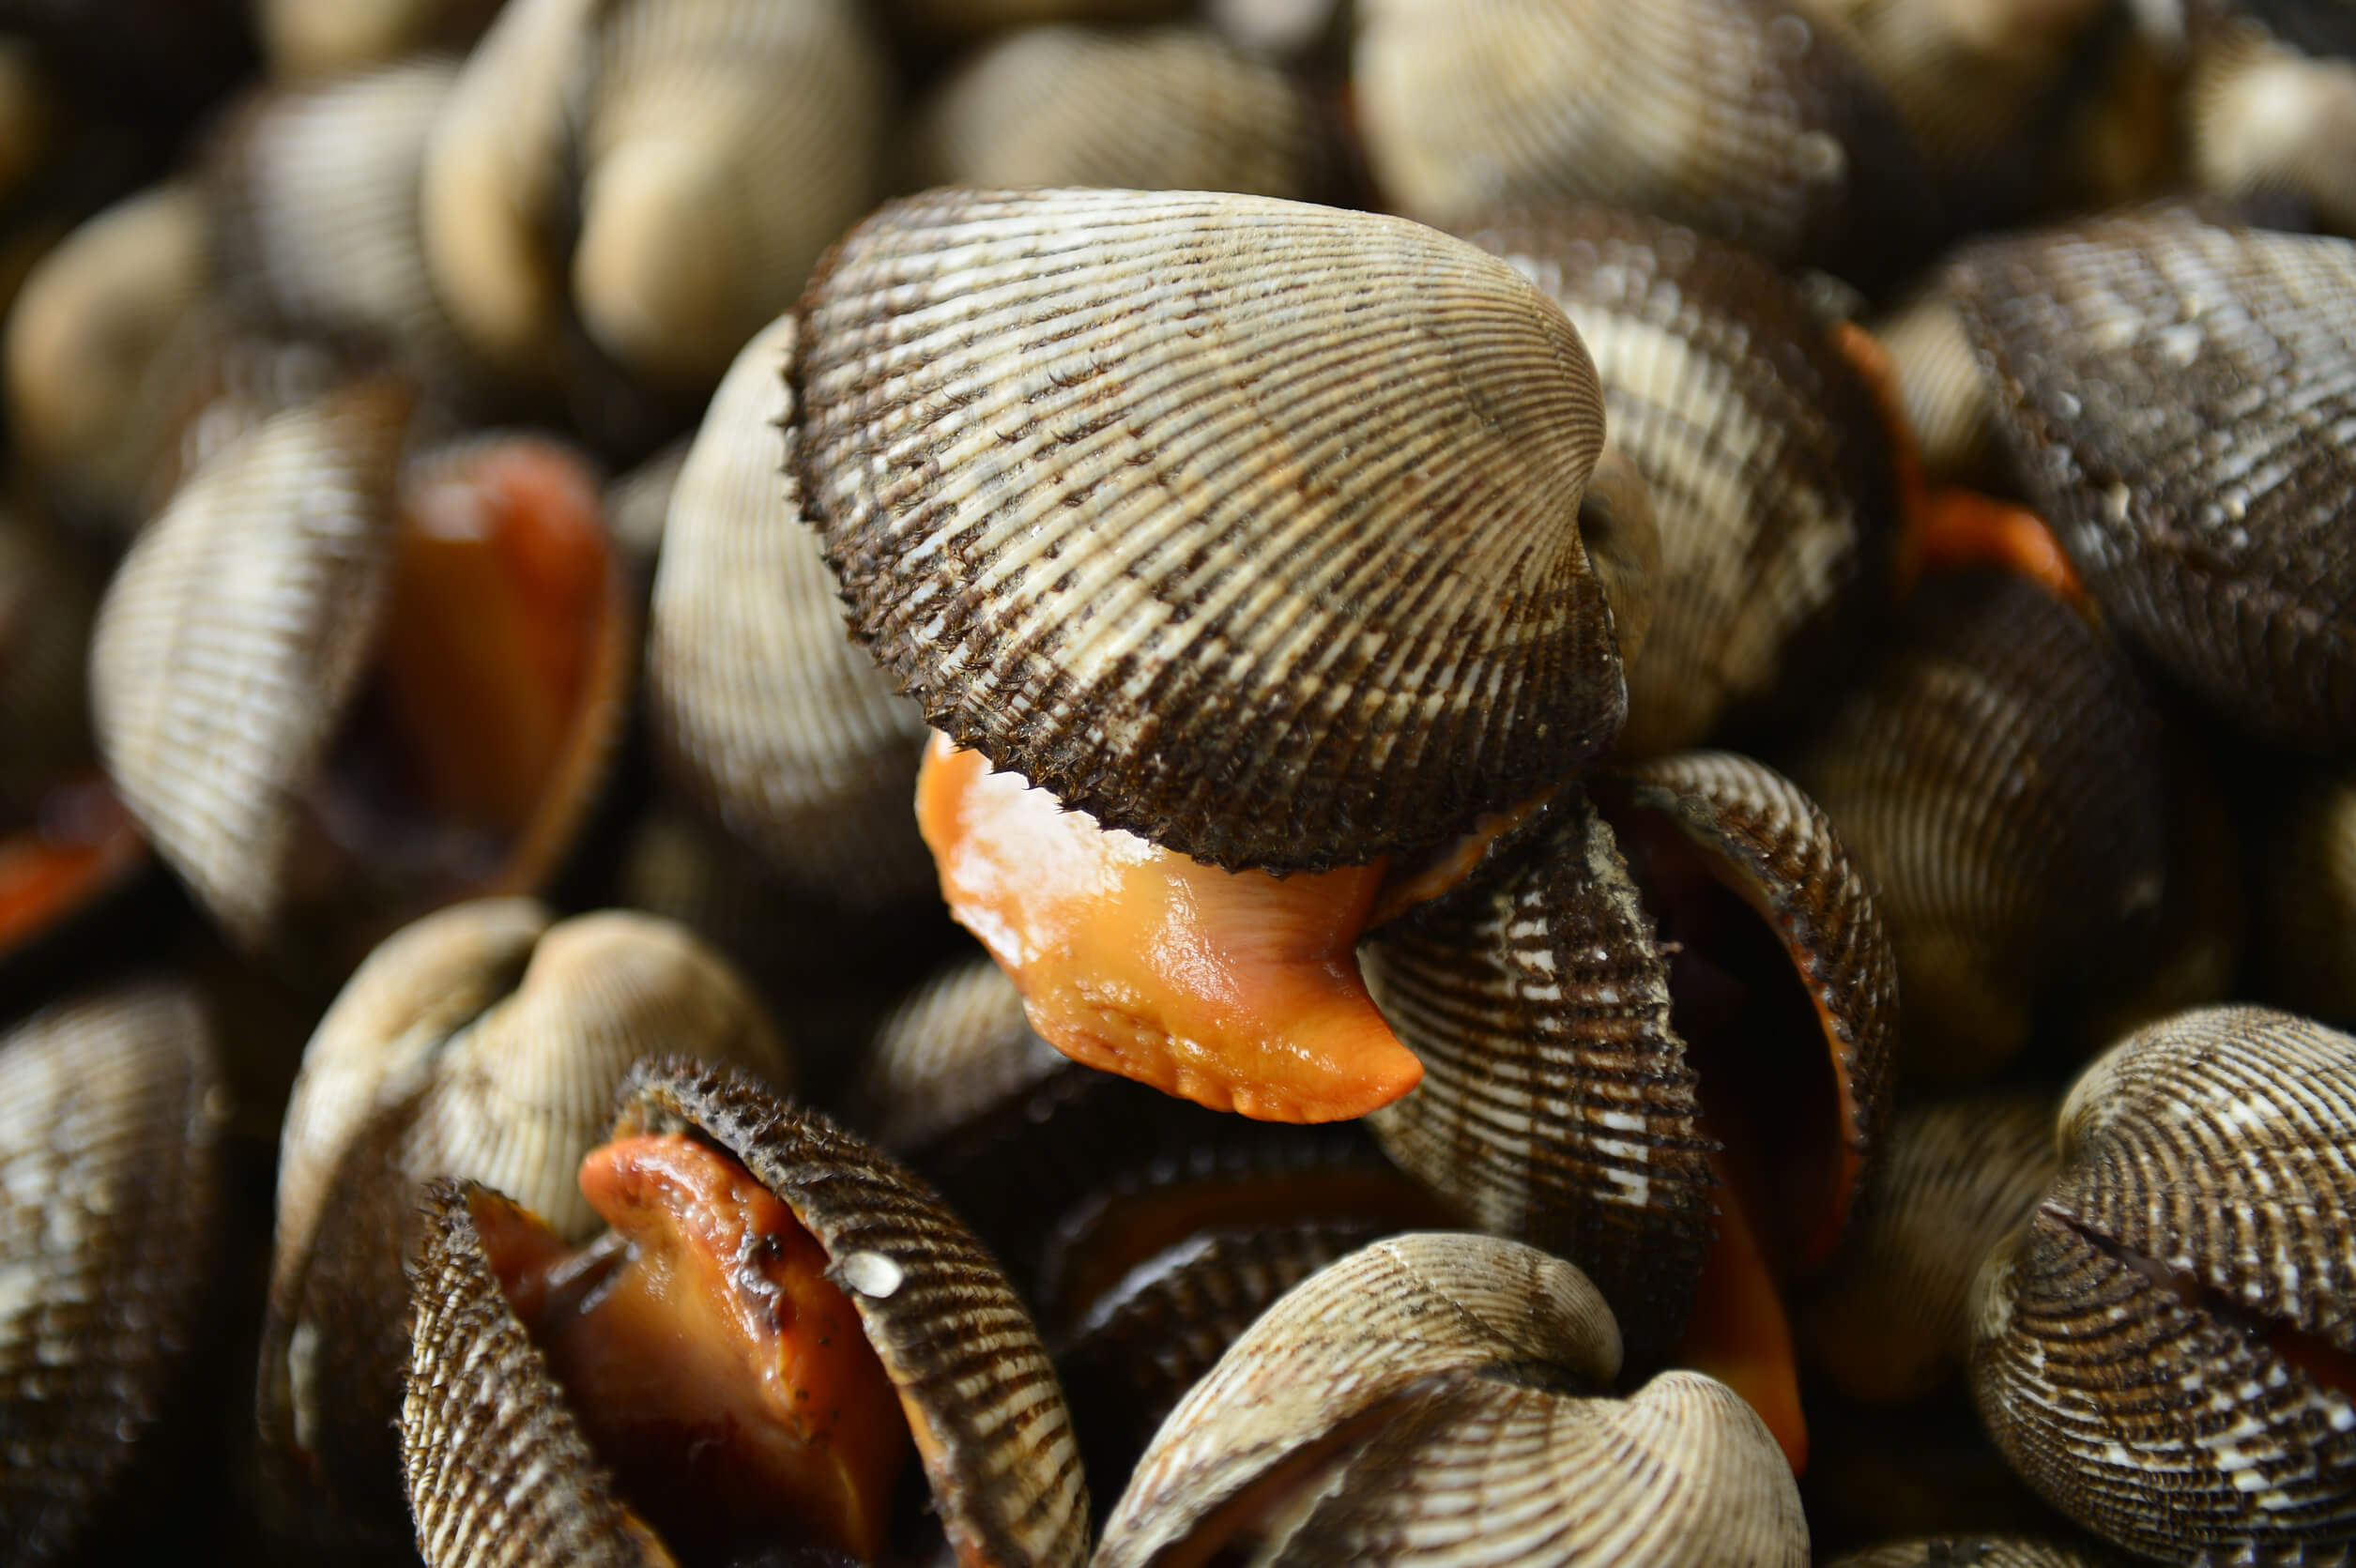 Among the foods with more protein are clams